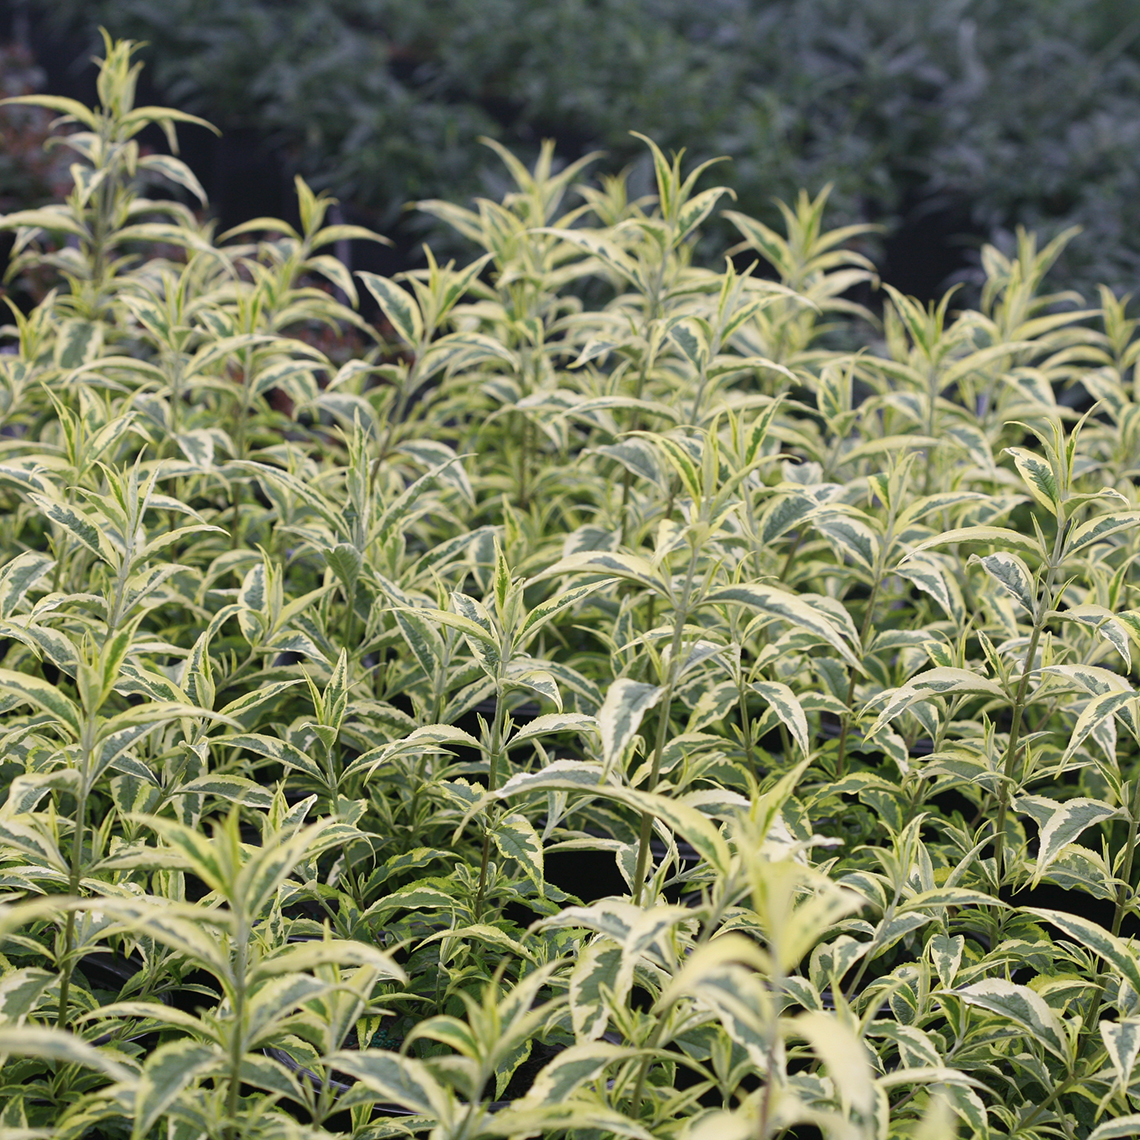 Yellow and green variegation of Buddleia Summer Skies